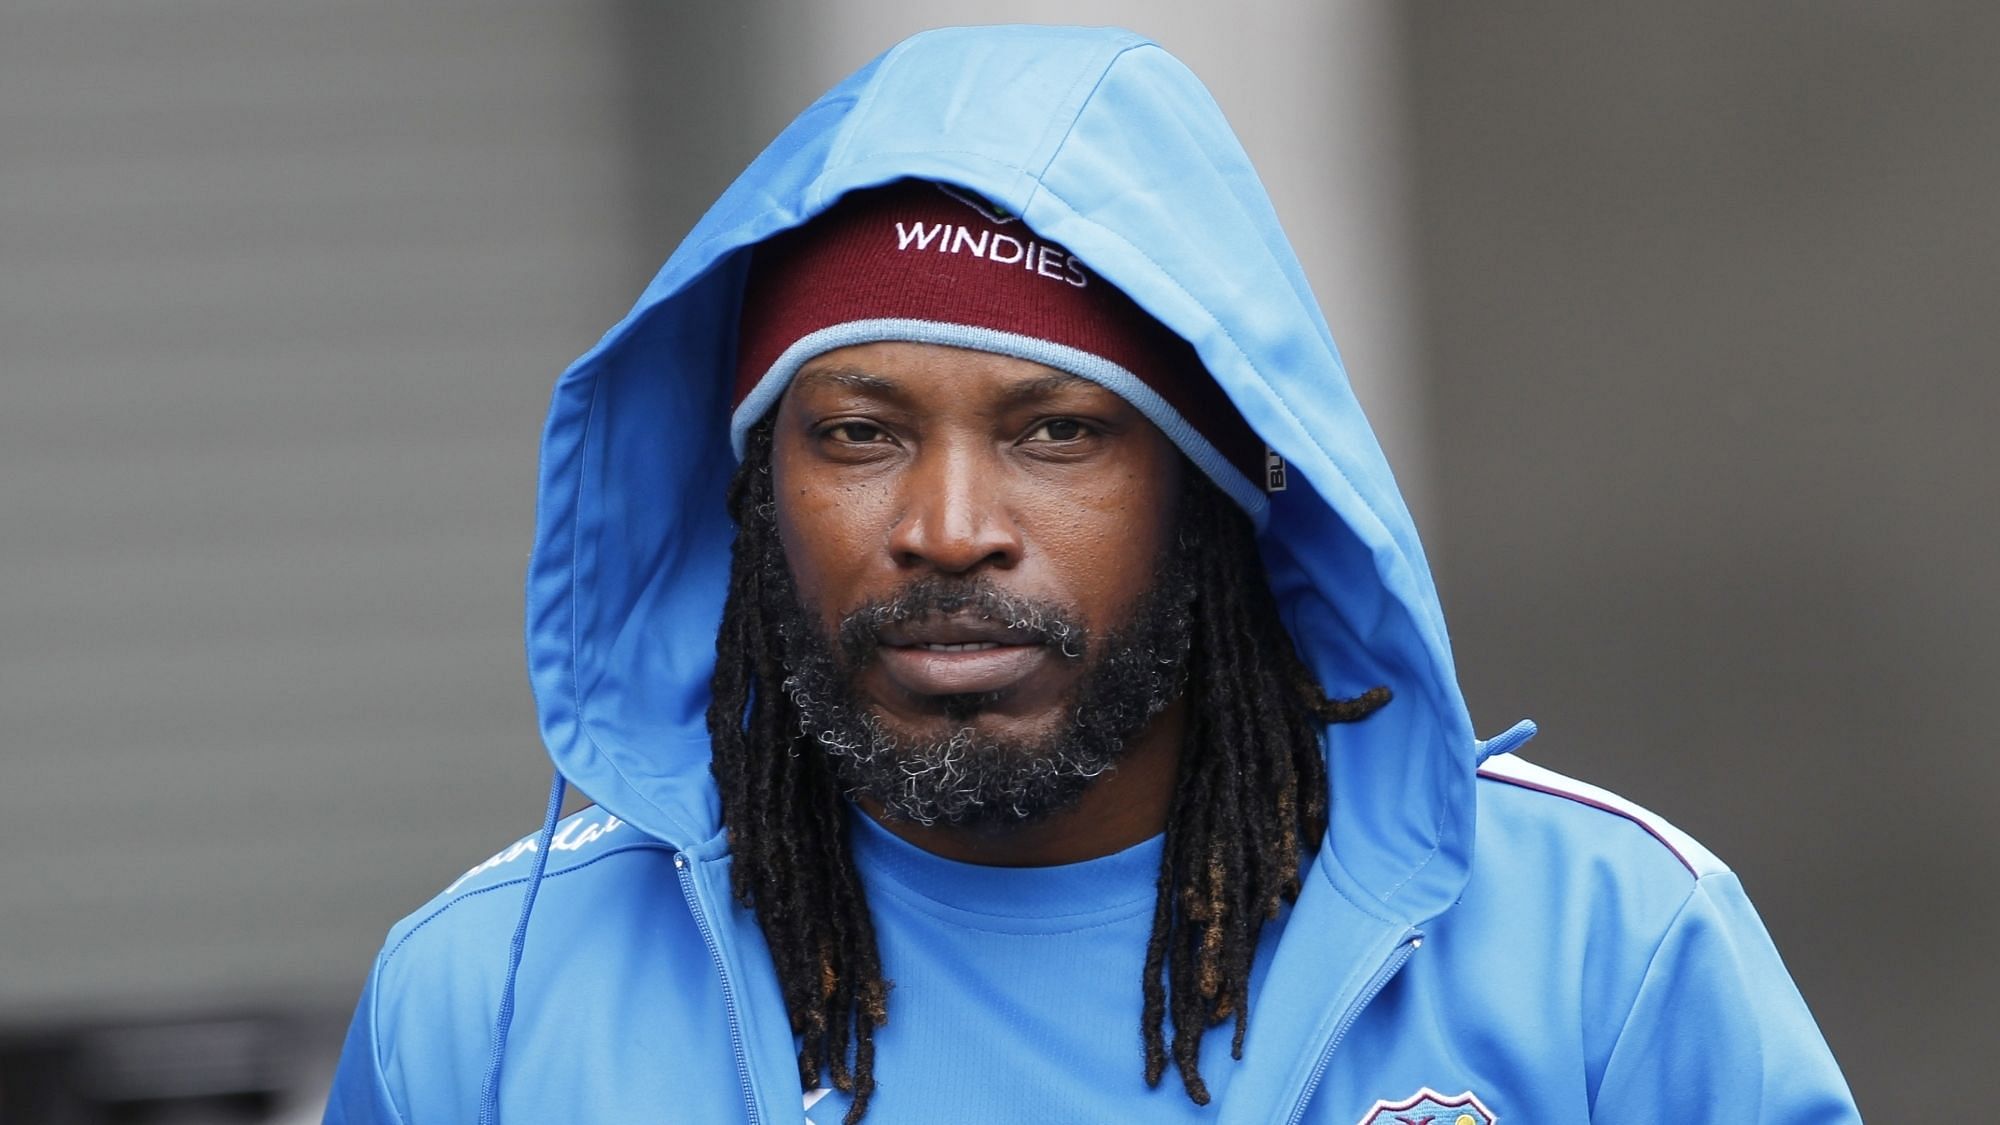 Chris Gayle has called his former teammate Ramnaresh Sarwan “worse than coronavirus”, accusing the Guyanese of plotting his exit from Caribbean Premier League outfit Jamaica Tallawahs.